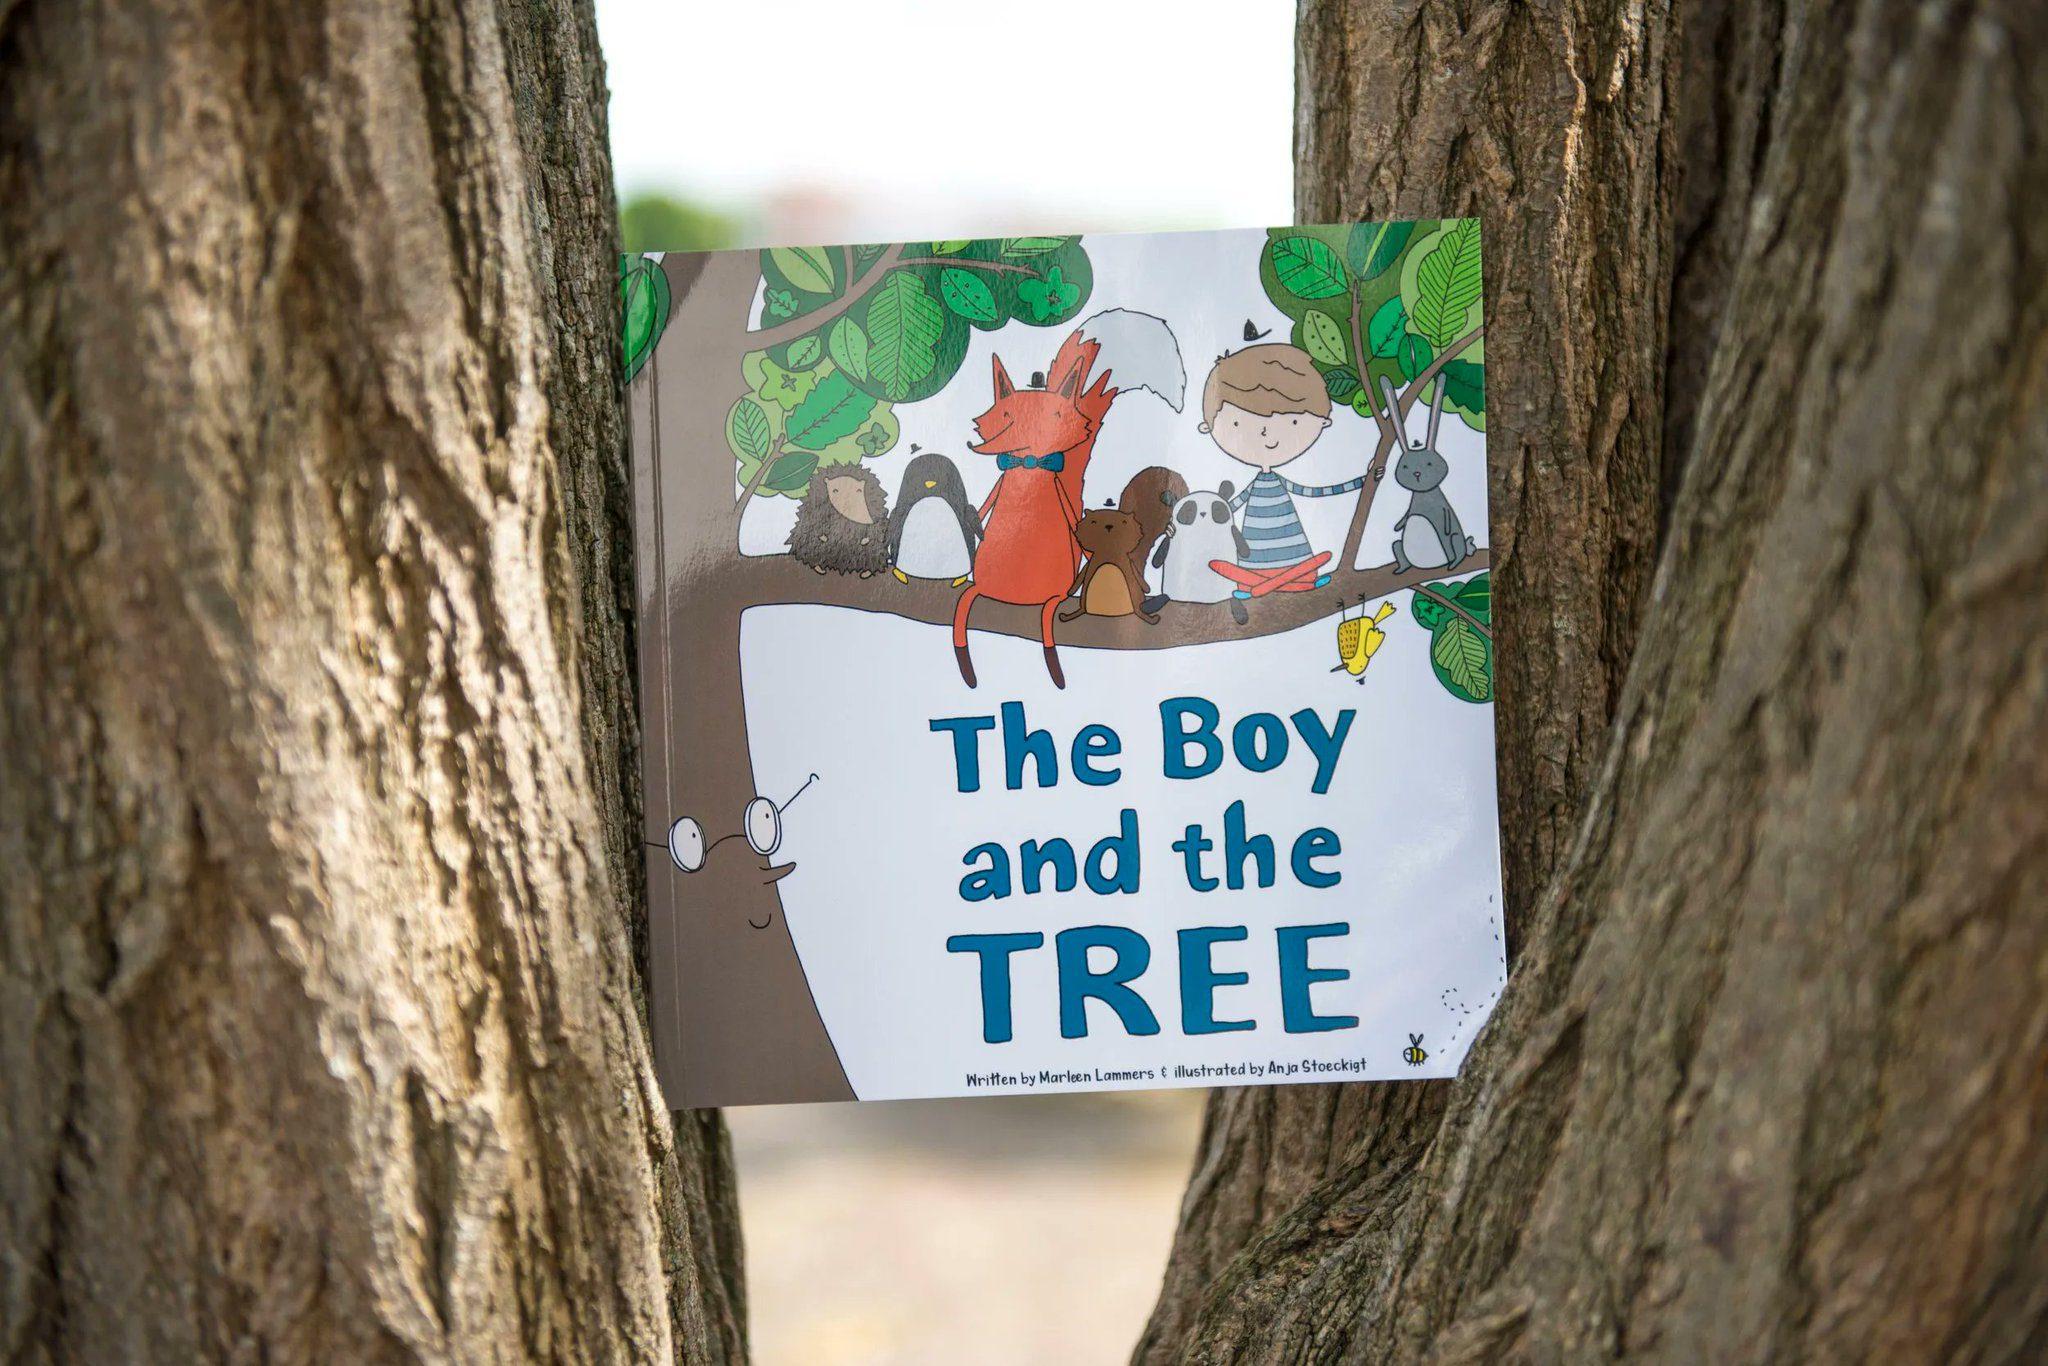 A copy of The Boy and the Tree lodged in a tree